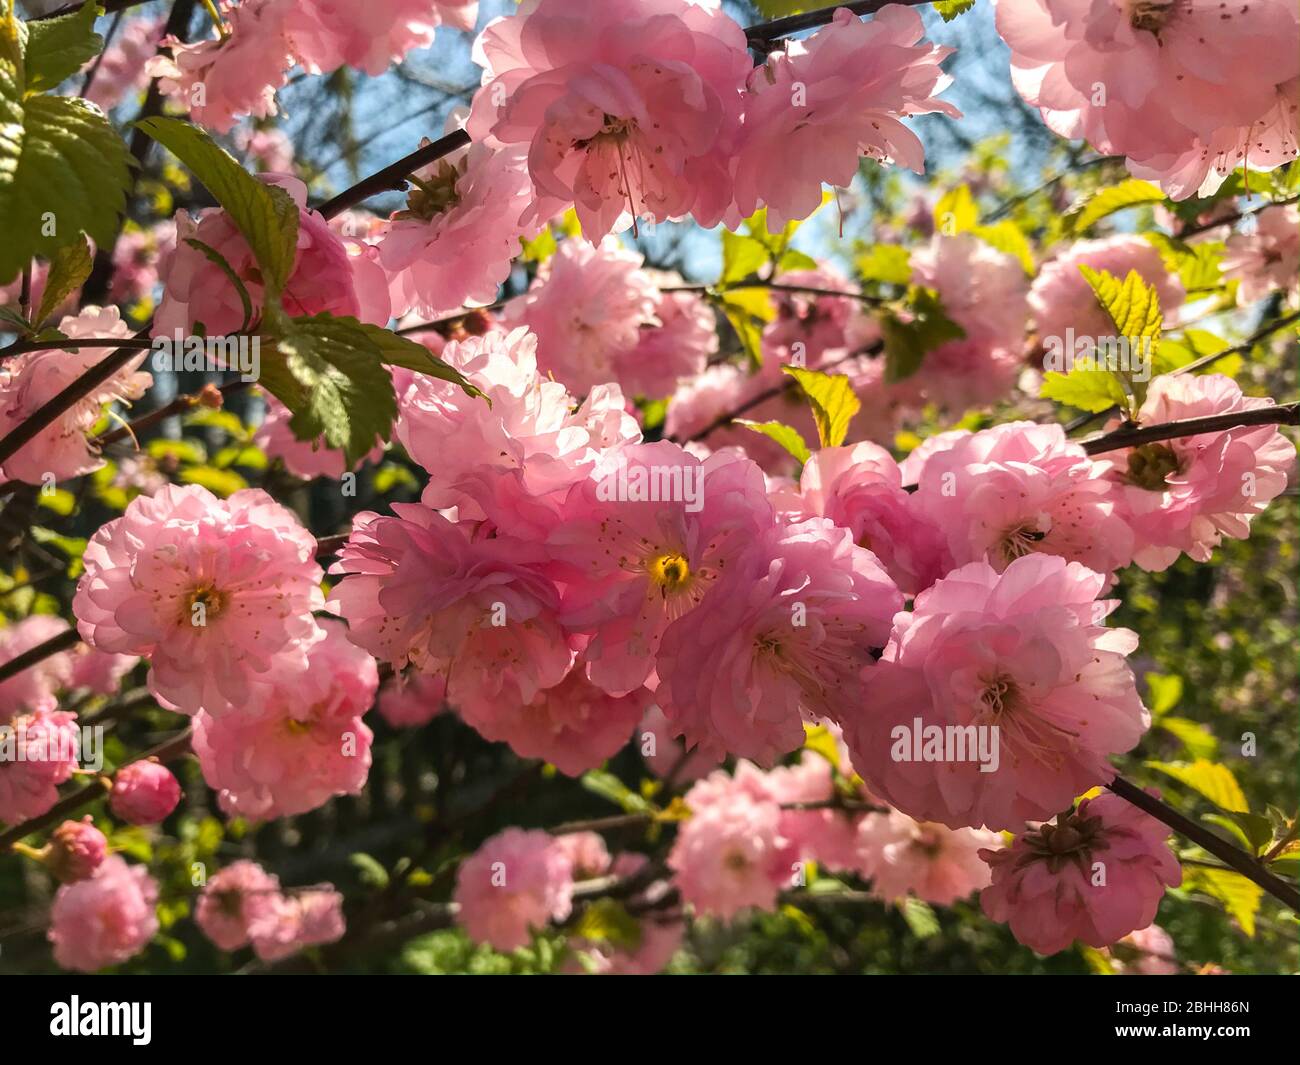 Prunus Triloba (Flowering Plum, Flowering Almond, Louiseania). Branches With Lush Pink Flowers. Spring Rose Cherry Blossom With Young Green Leaves. Stock Photo